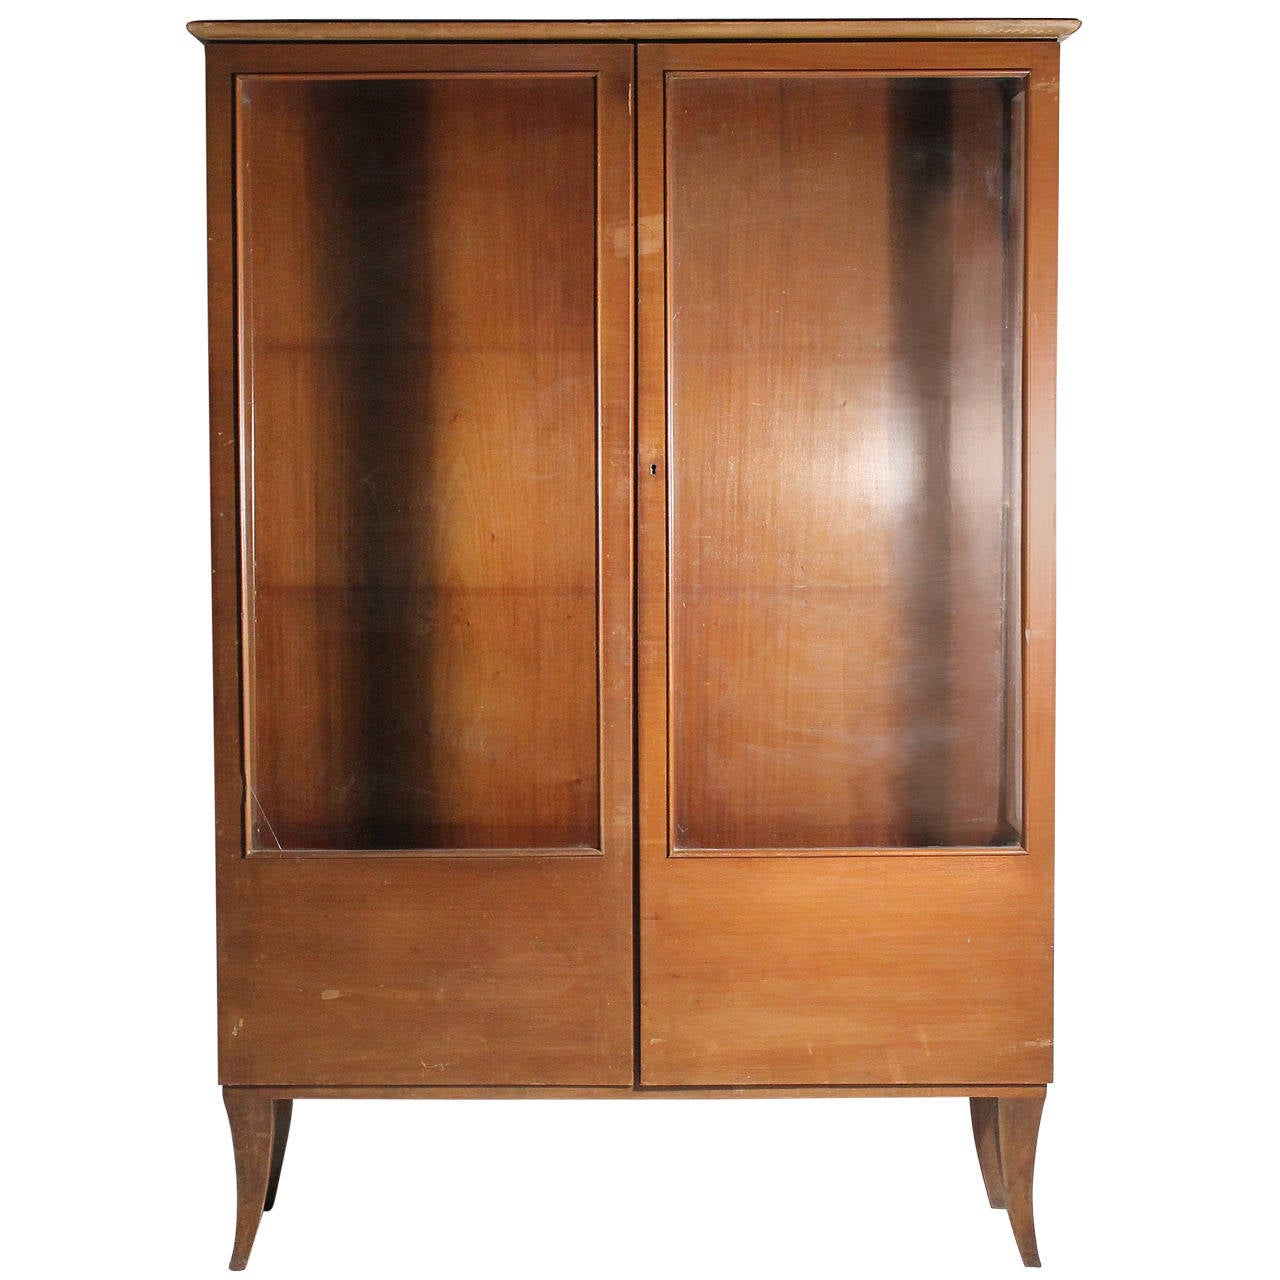 A German Austrian Deco China Cabinet. A very practical scale. Clean lines with Austrian style legs. Adjustable shelving peg holes. Would be nice to have glass cut for shelving. Please see condition report. Cabinet looks great in this finish color